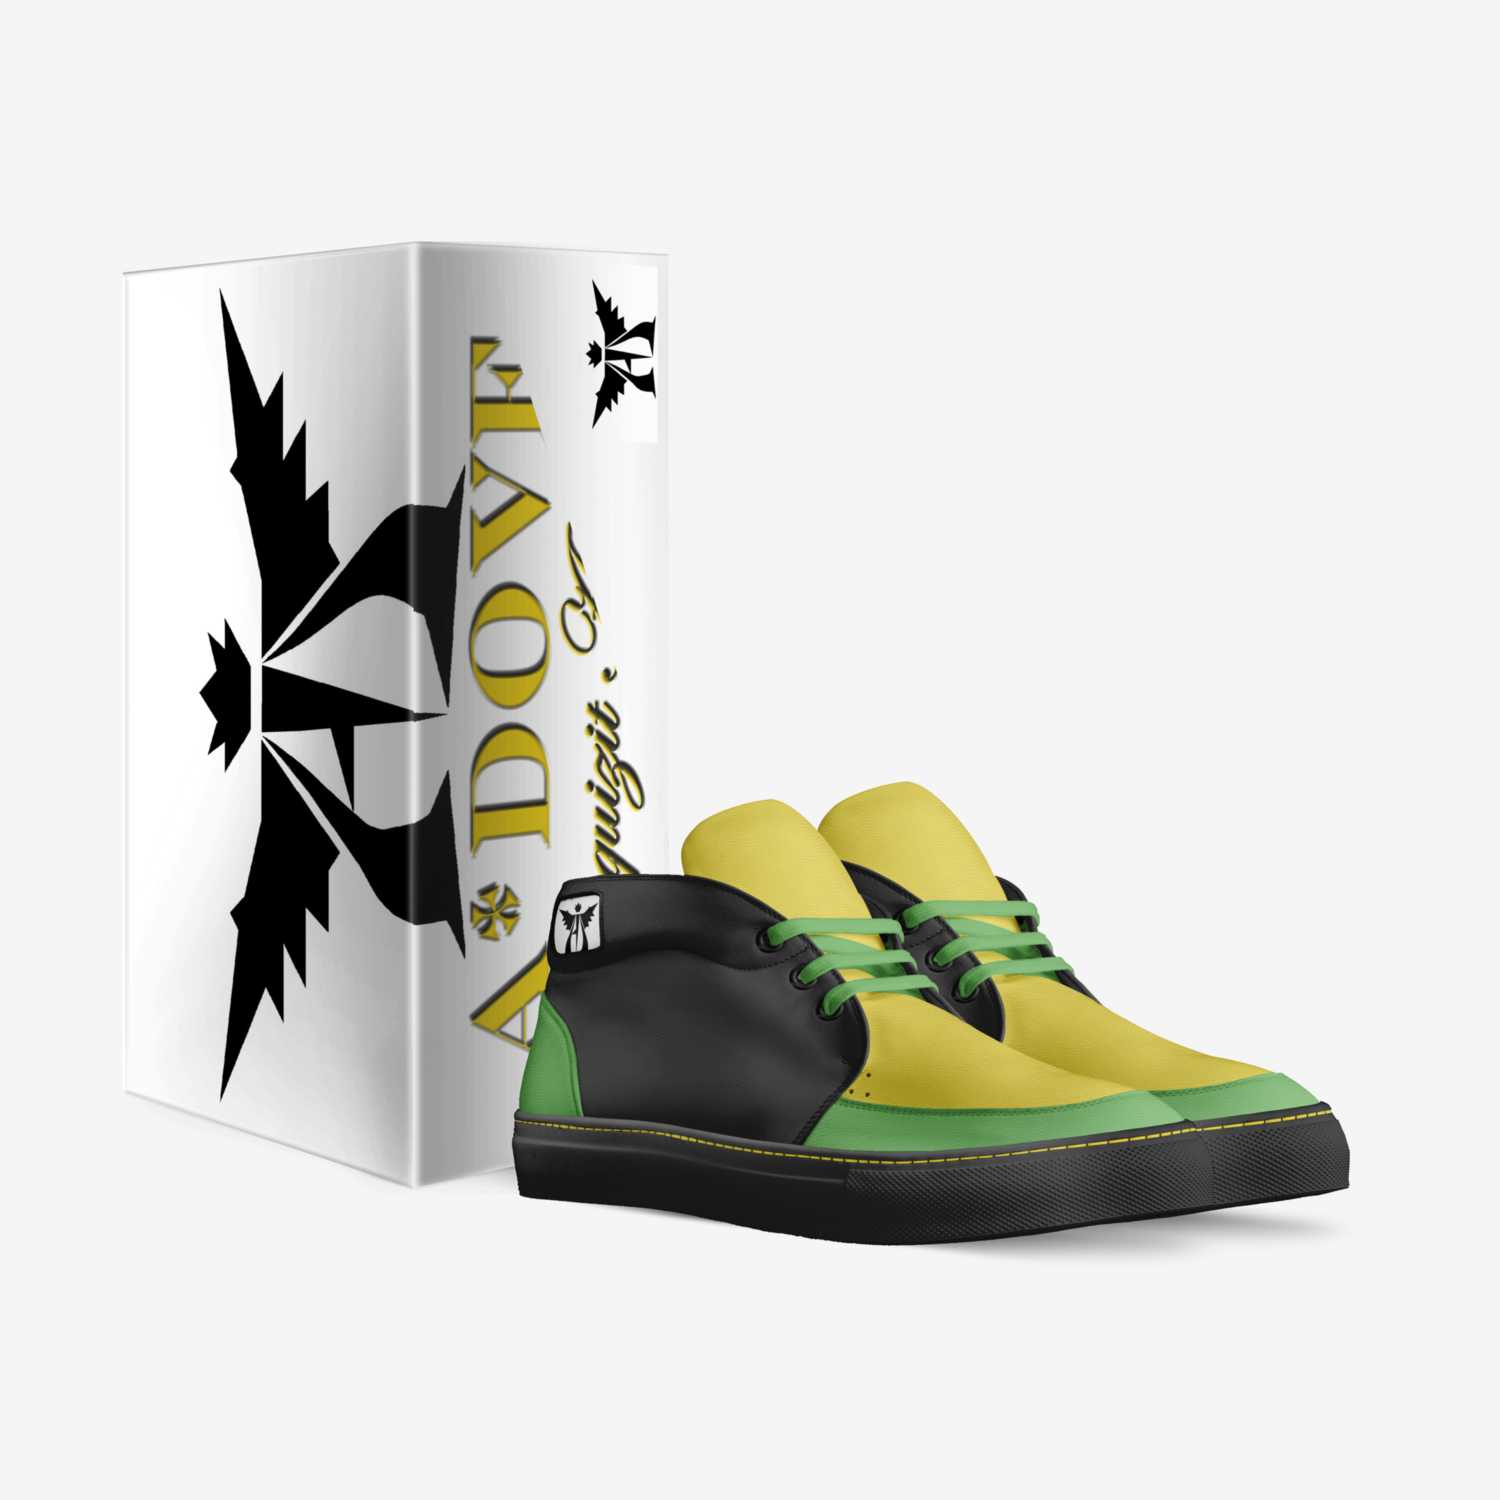 Yardman custom made in Italy shoes by A* Dove | Box view